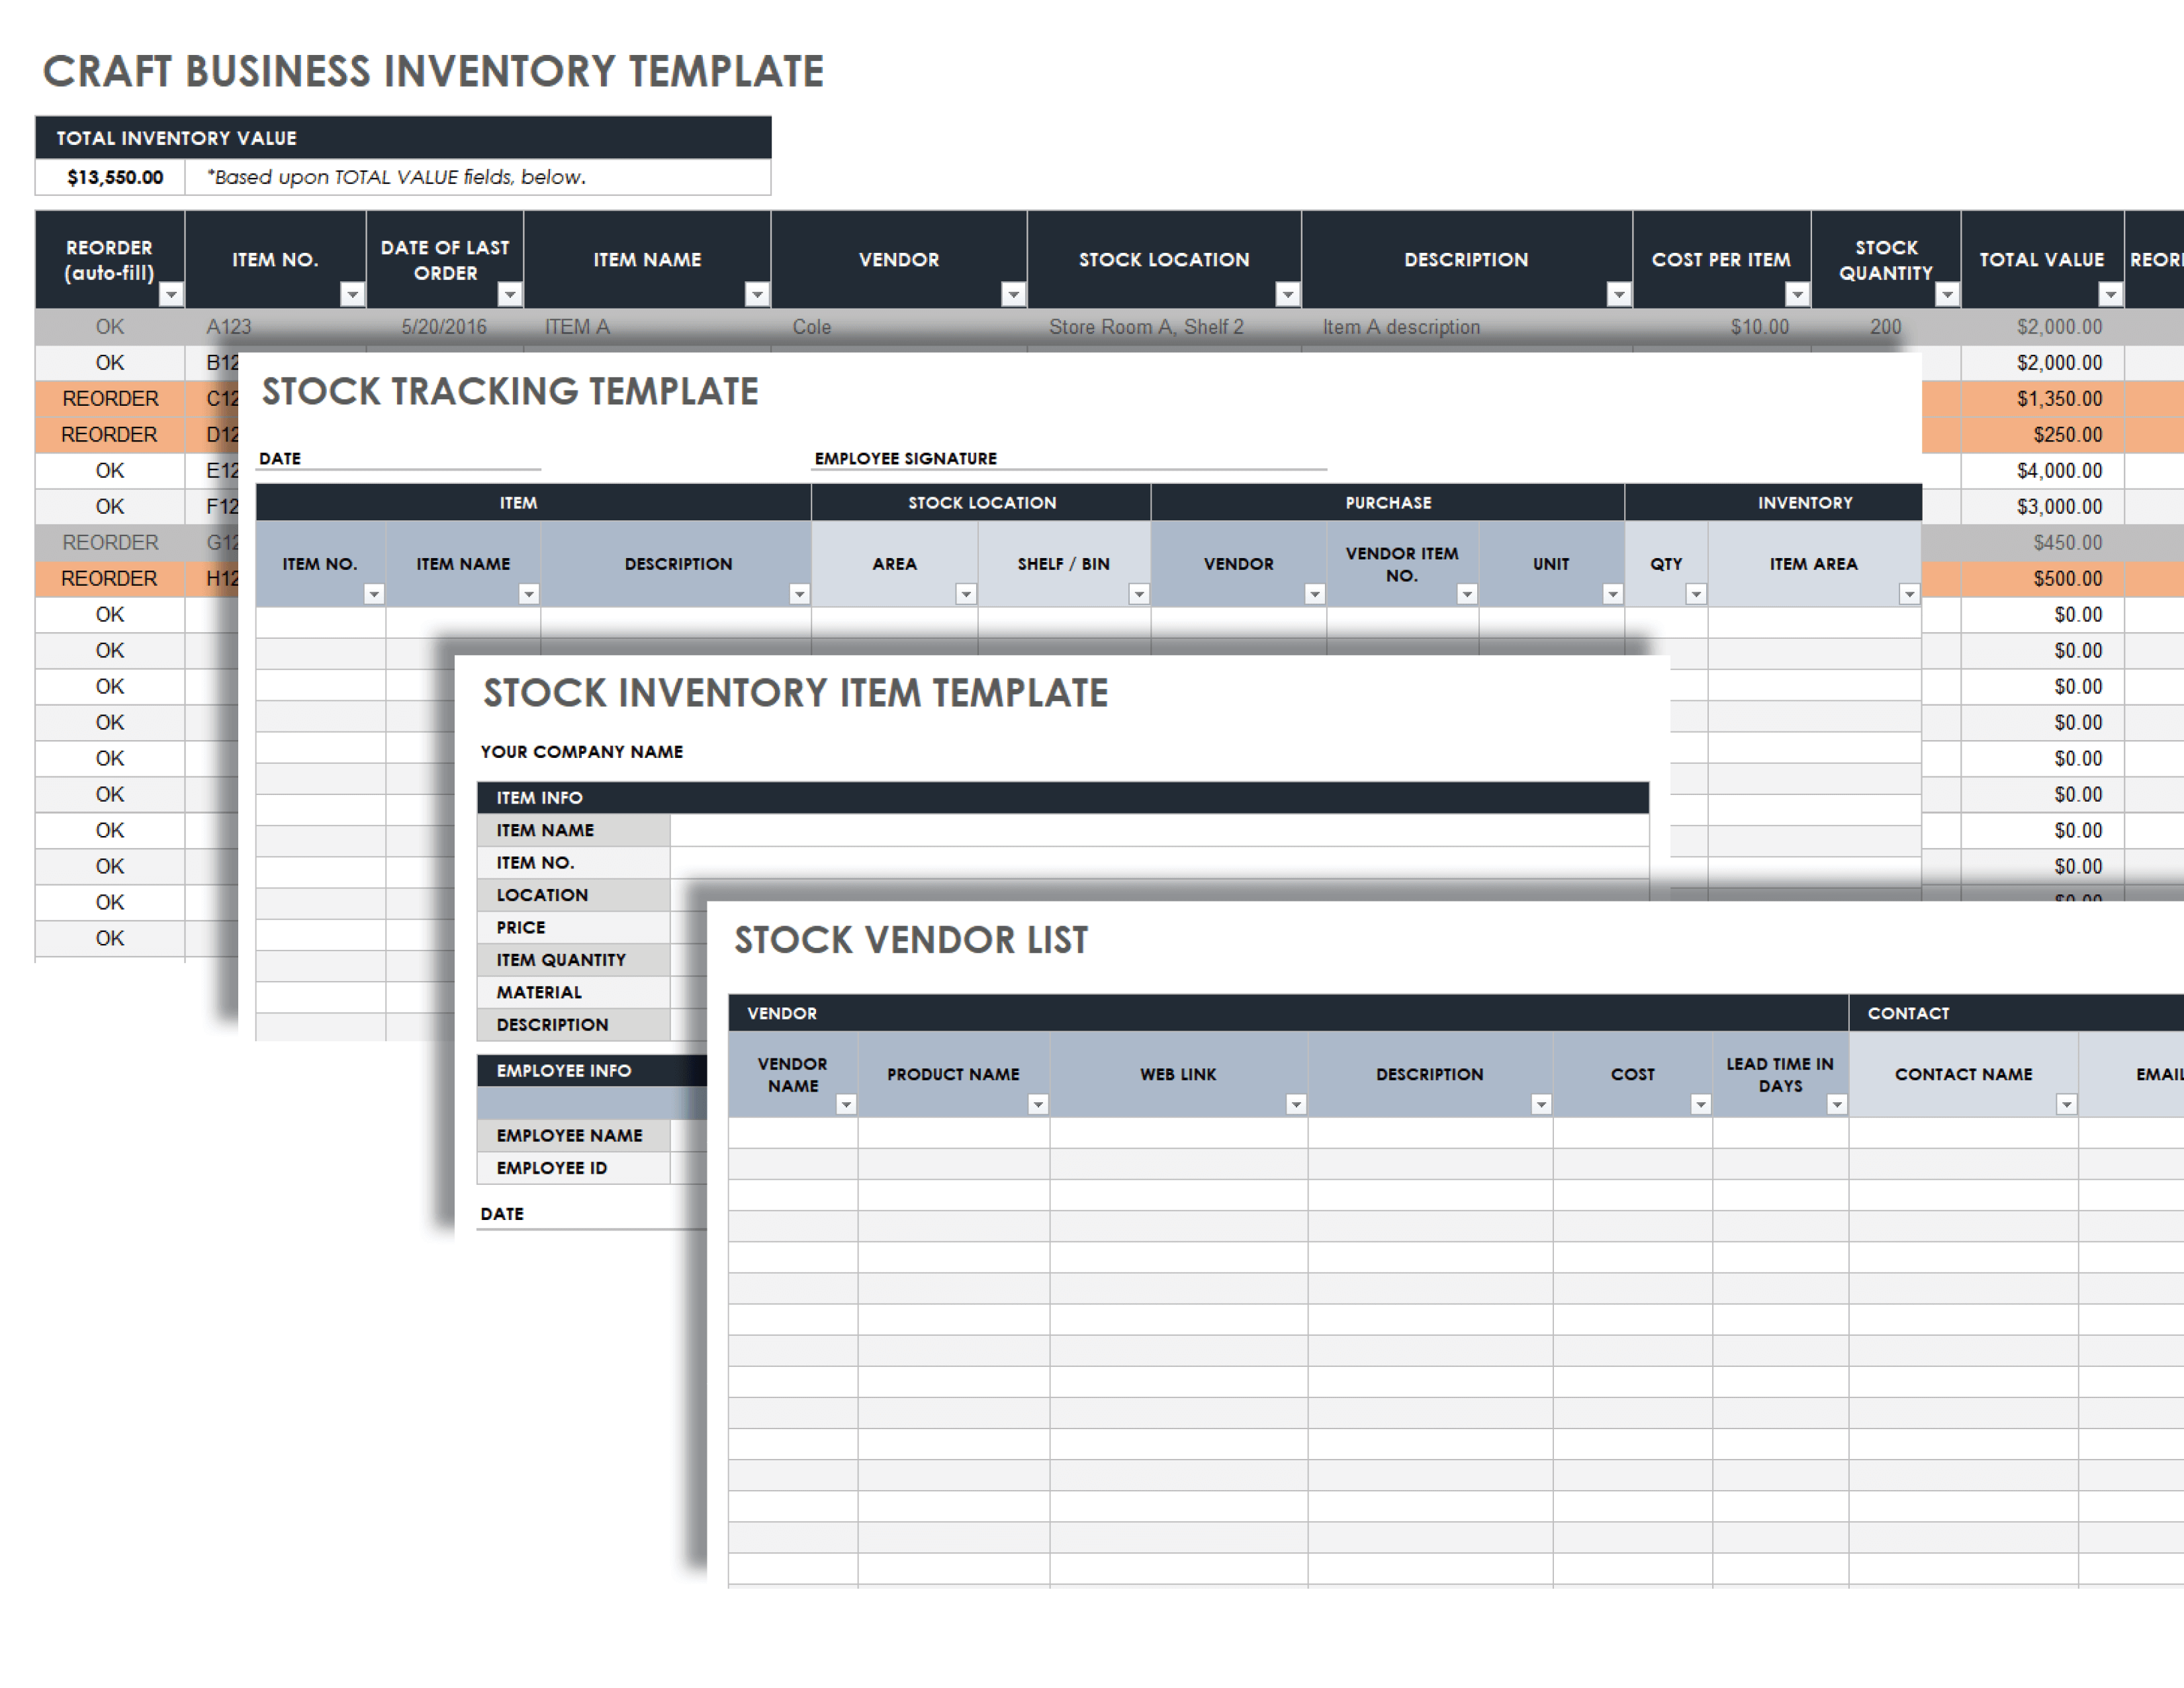 Craft Business Inventory Template